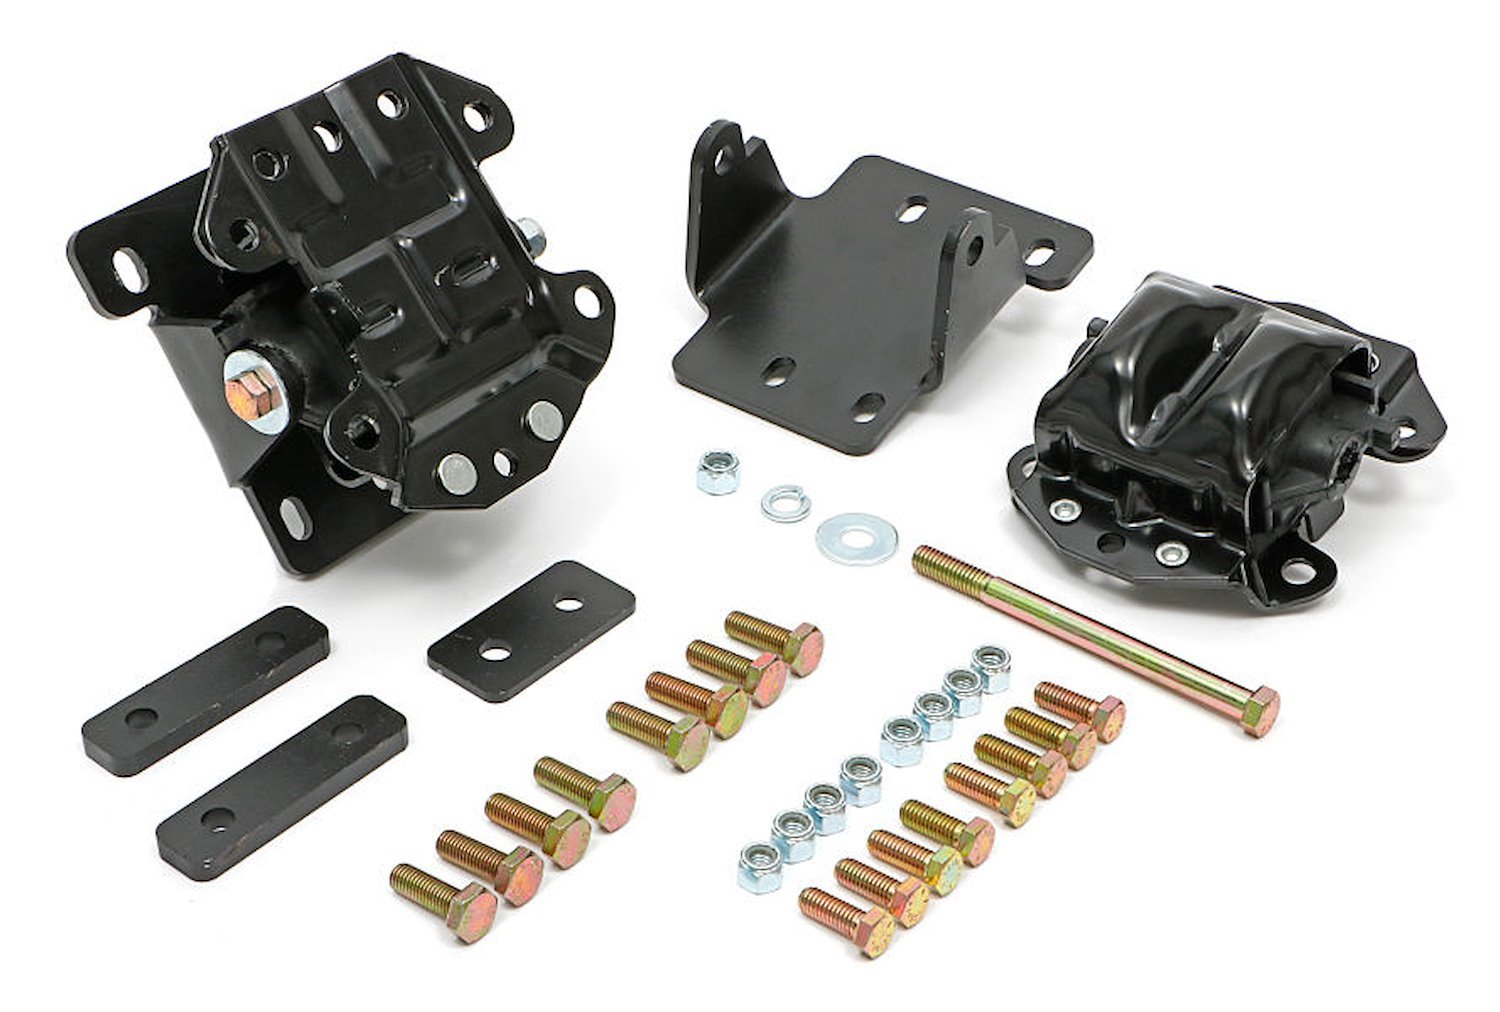 Engine Mount Swap Kit for GM Gen III LS w/4L60E, 4L70E Transmission in Select 1968-1972 Buick, Chevy, Oldsmobile, Pontiac Cars